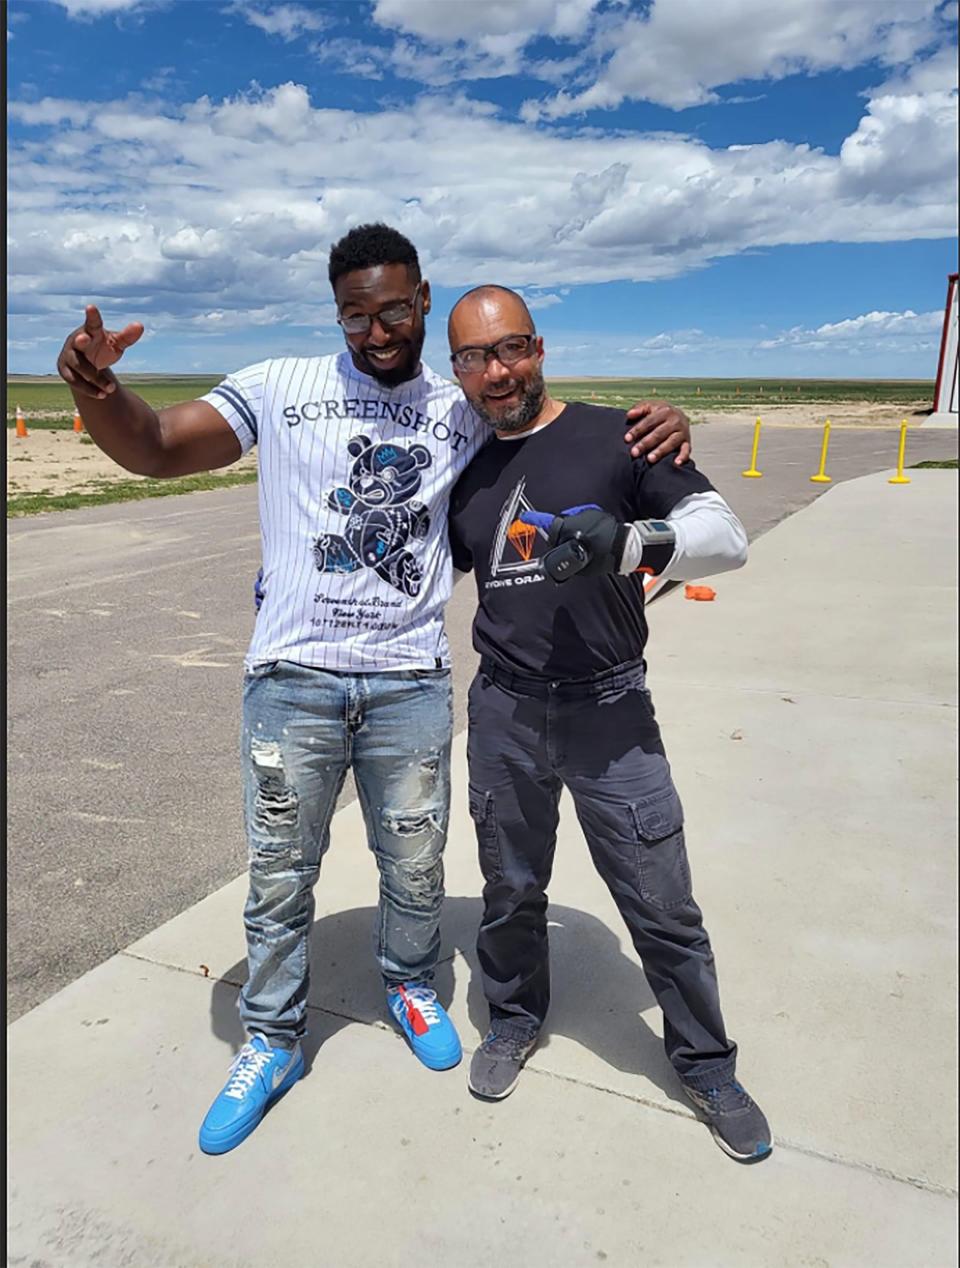 Marlin Dixon, left, poses with his skydiving instructor after jumping from a plane in Colorado in June. Dixon who went to Denver to visit Vicki Conte, his friend and supporter.